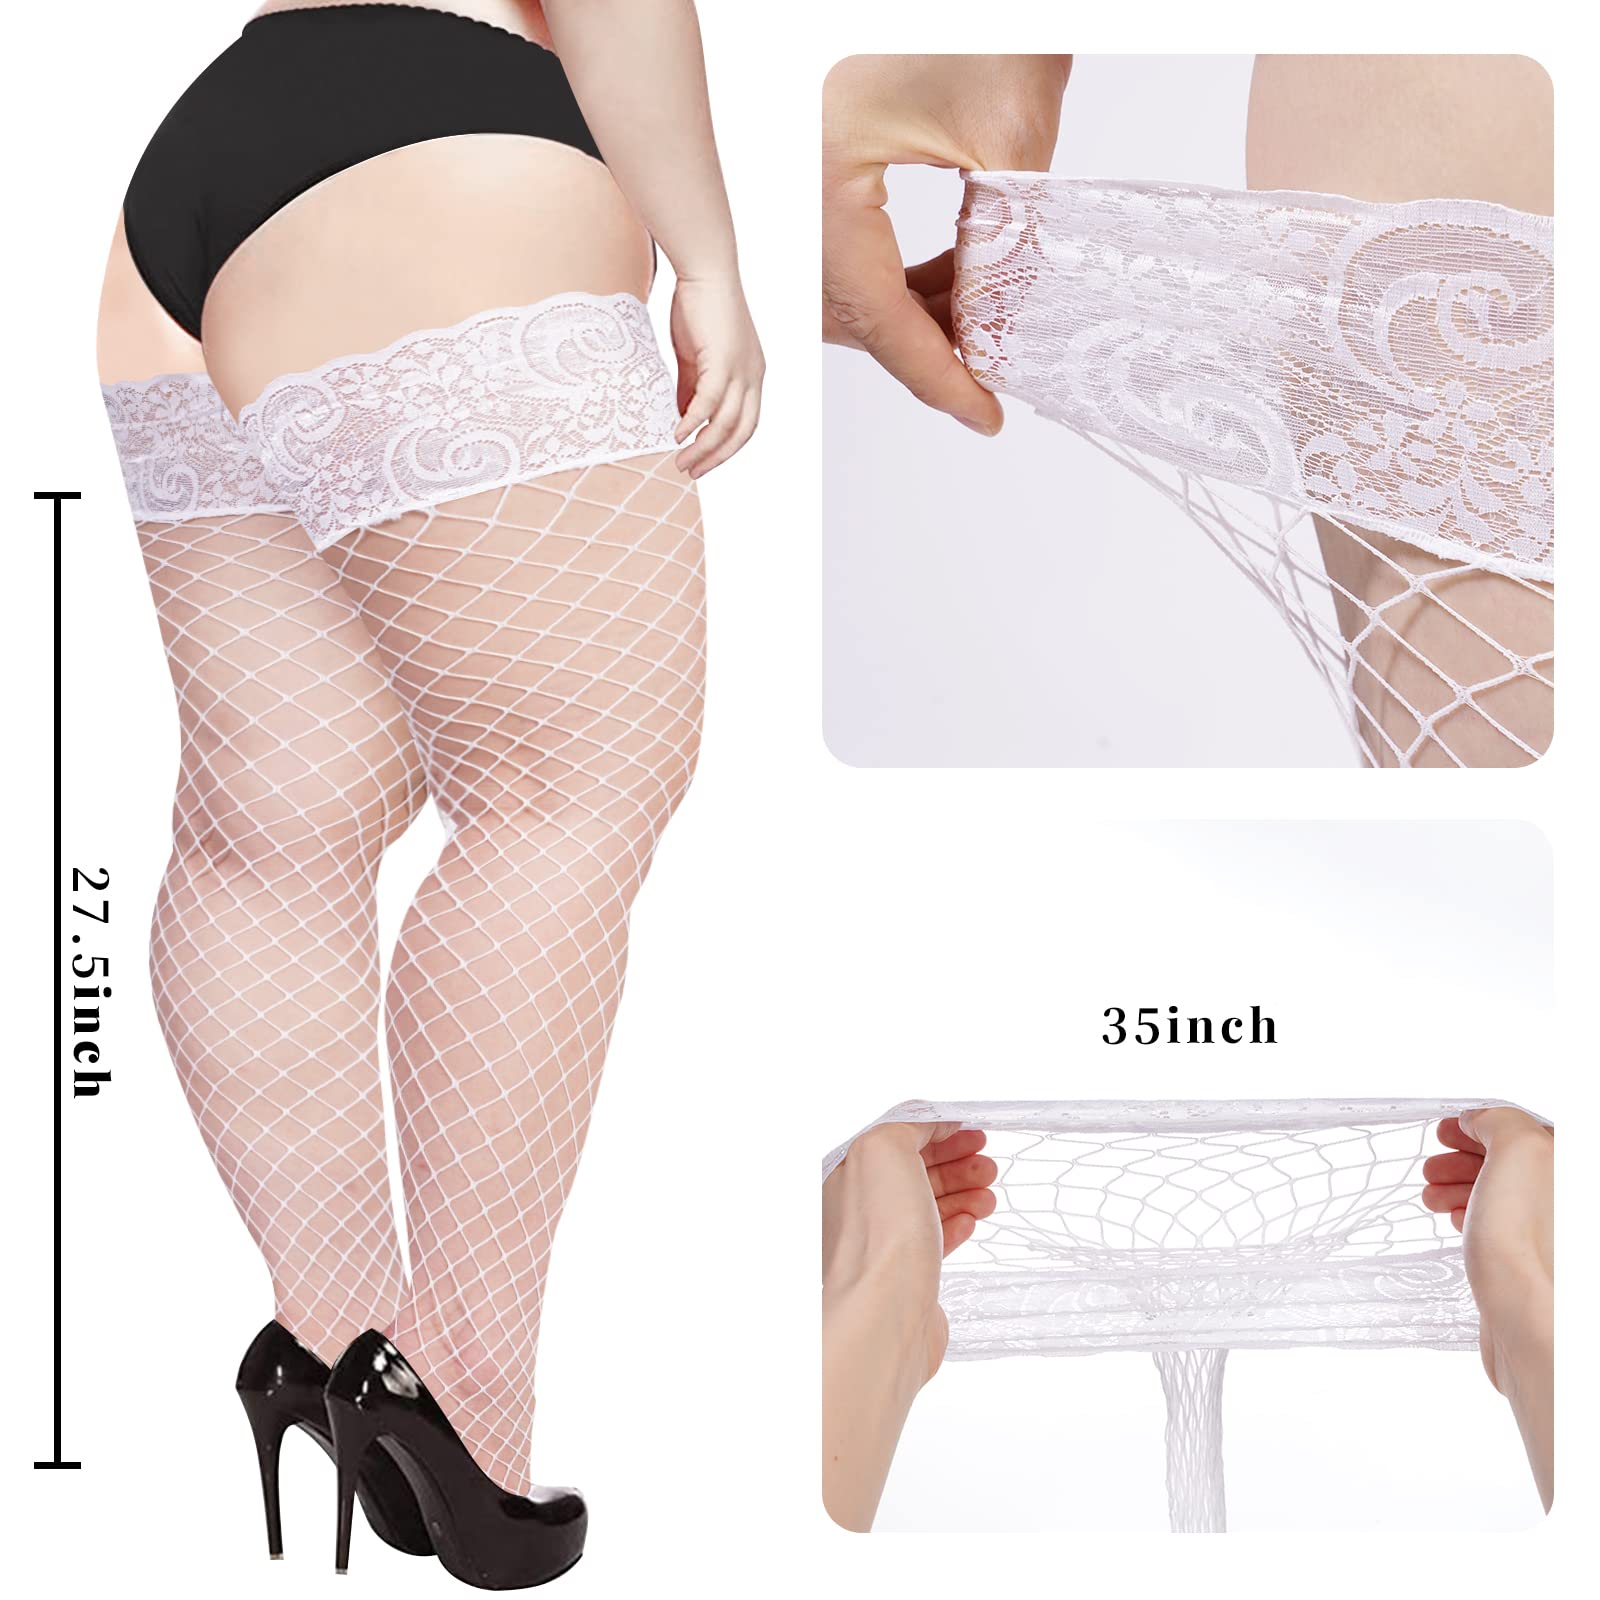 Plus Size Fishnet Stockings Sheer Silicone Lace - Black Small Mesh